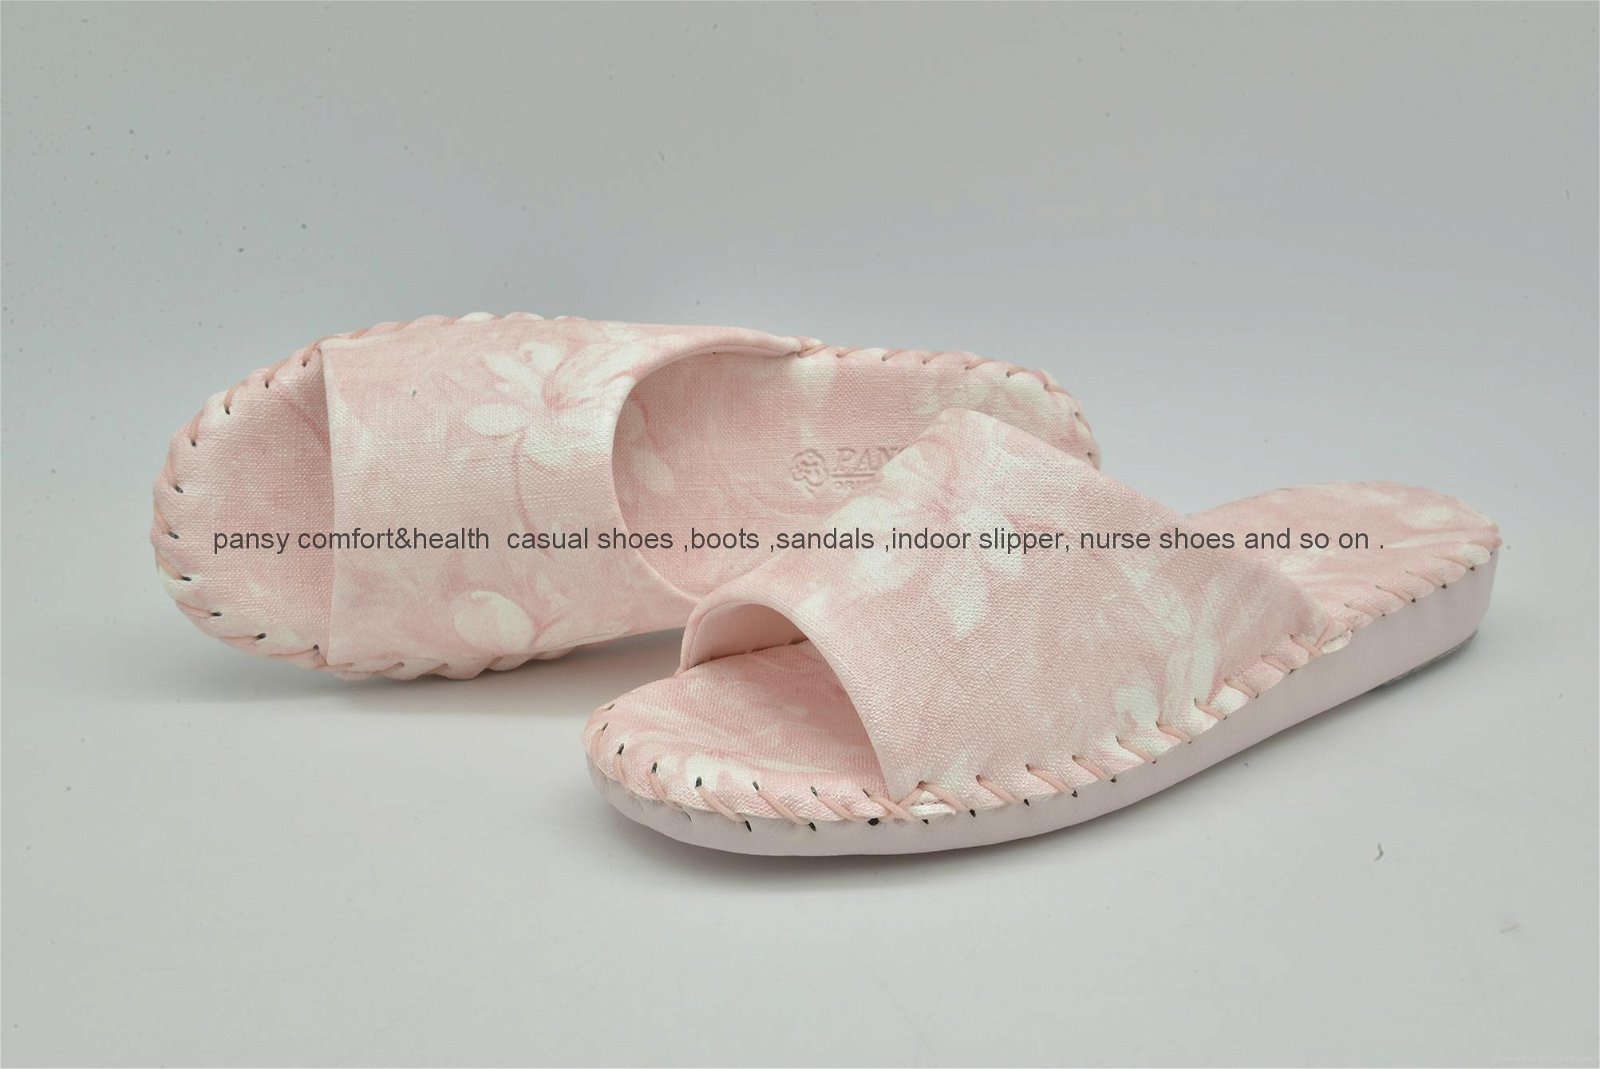 pansy comfort slipper for lady 9018 5